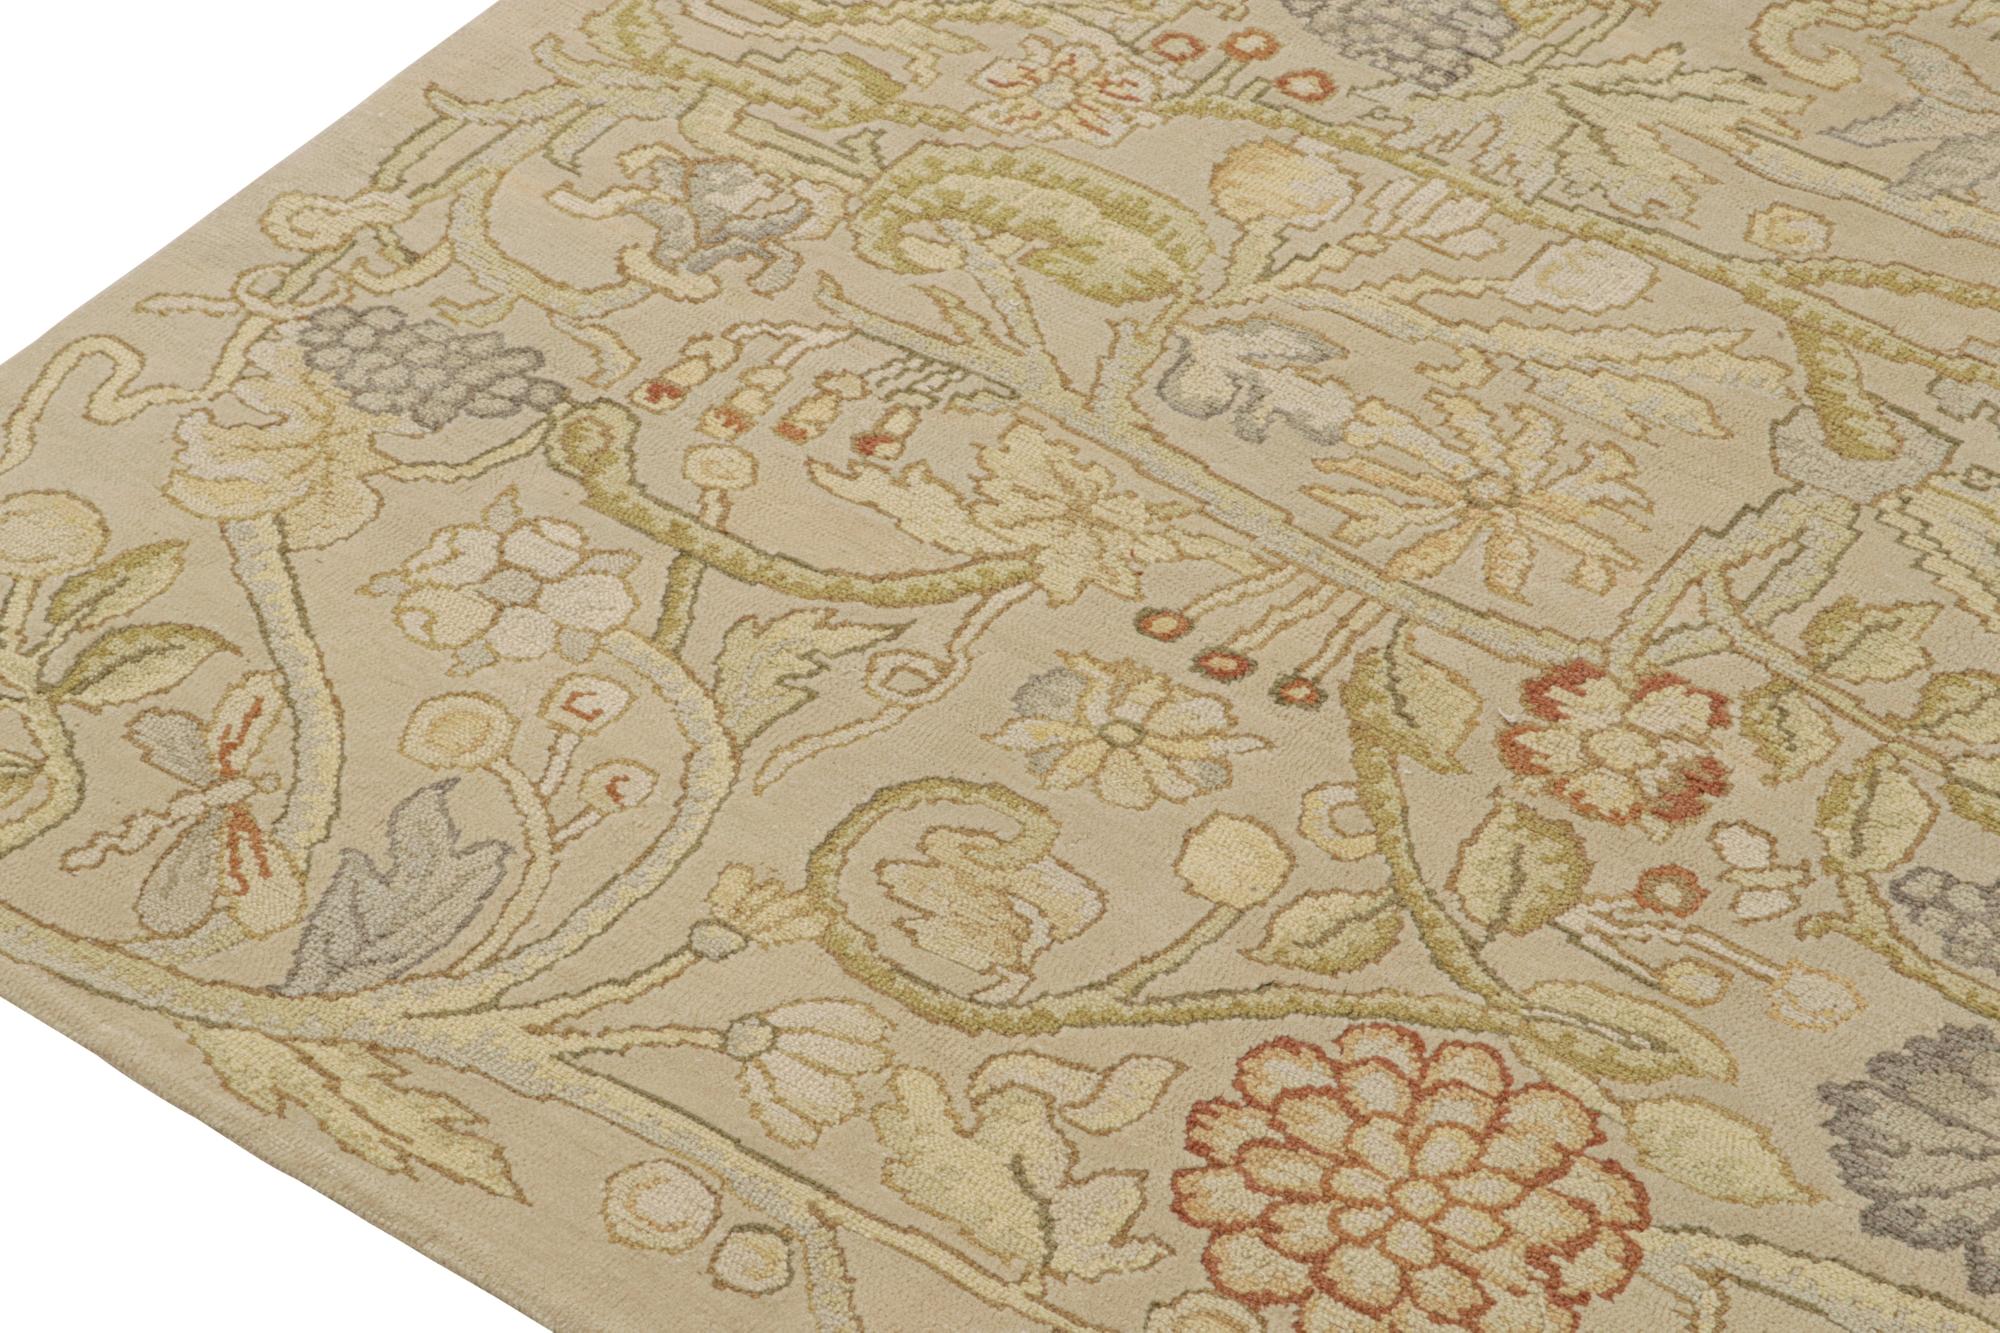 Contemporary Rug & Kilim’s English Tudor Style Flatweave in Beige with Floral Patterns For Sale